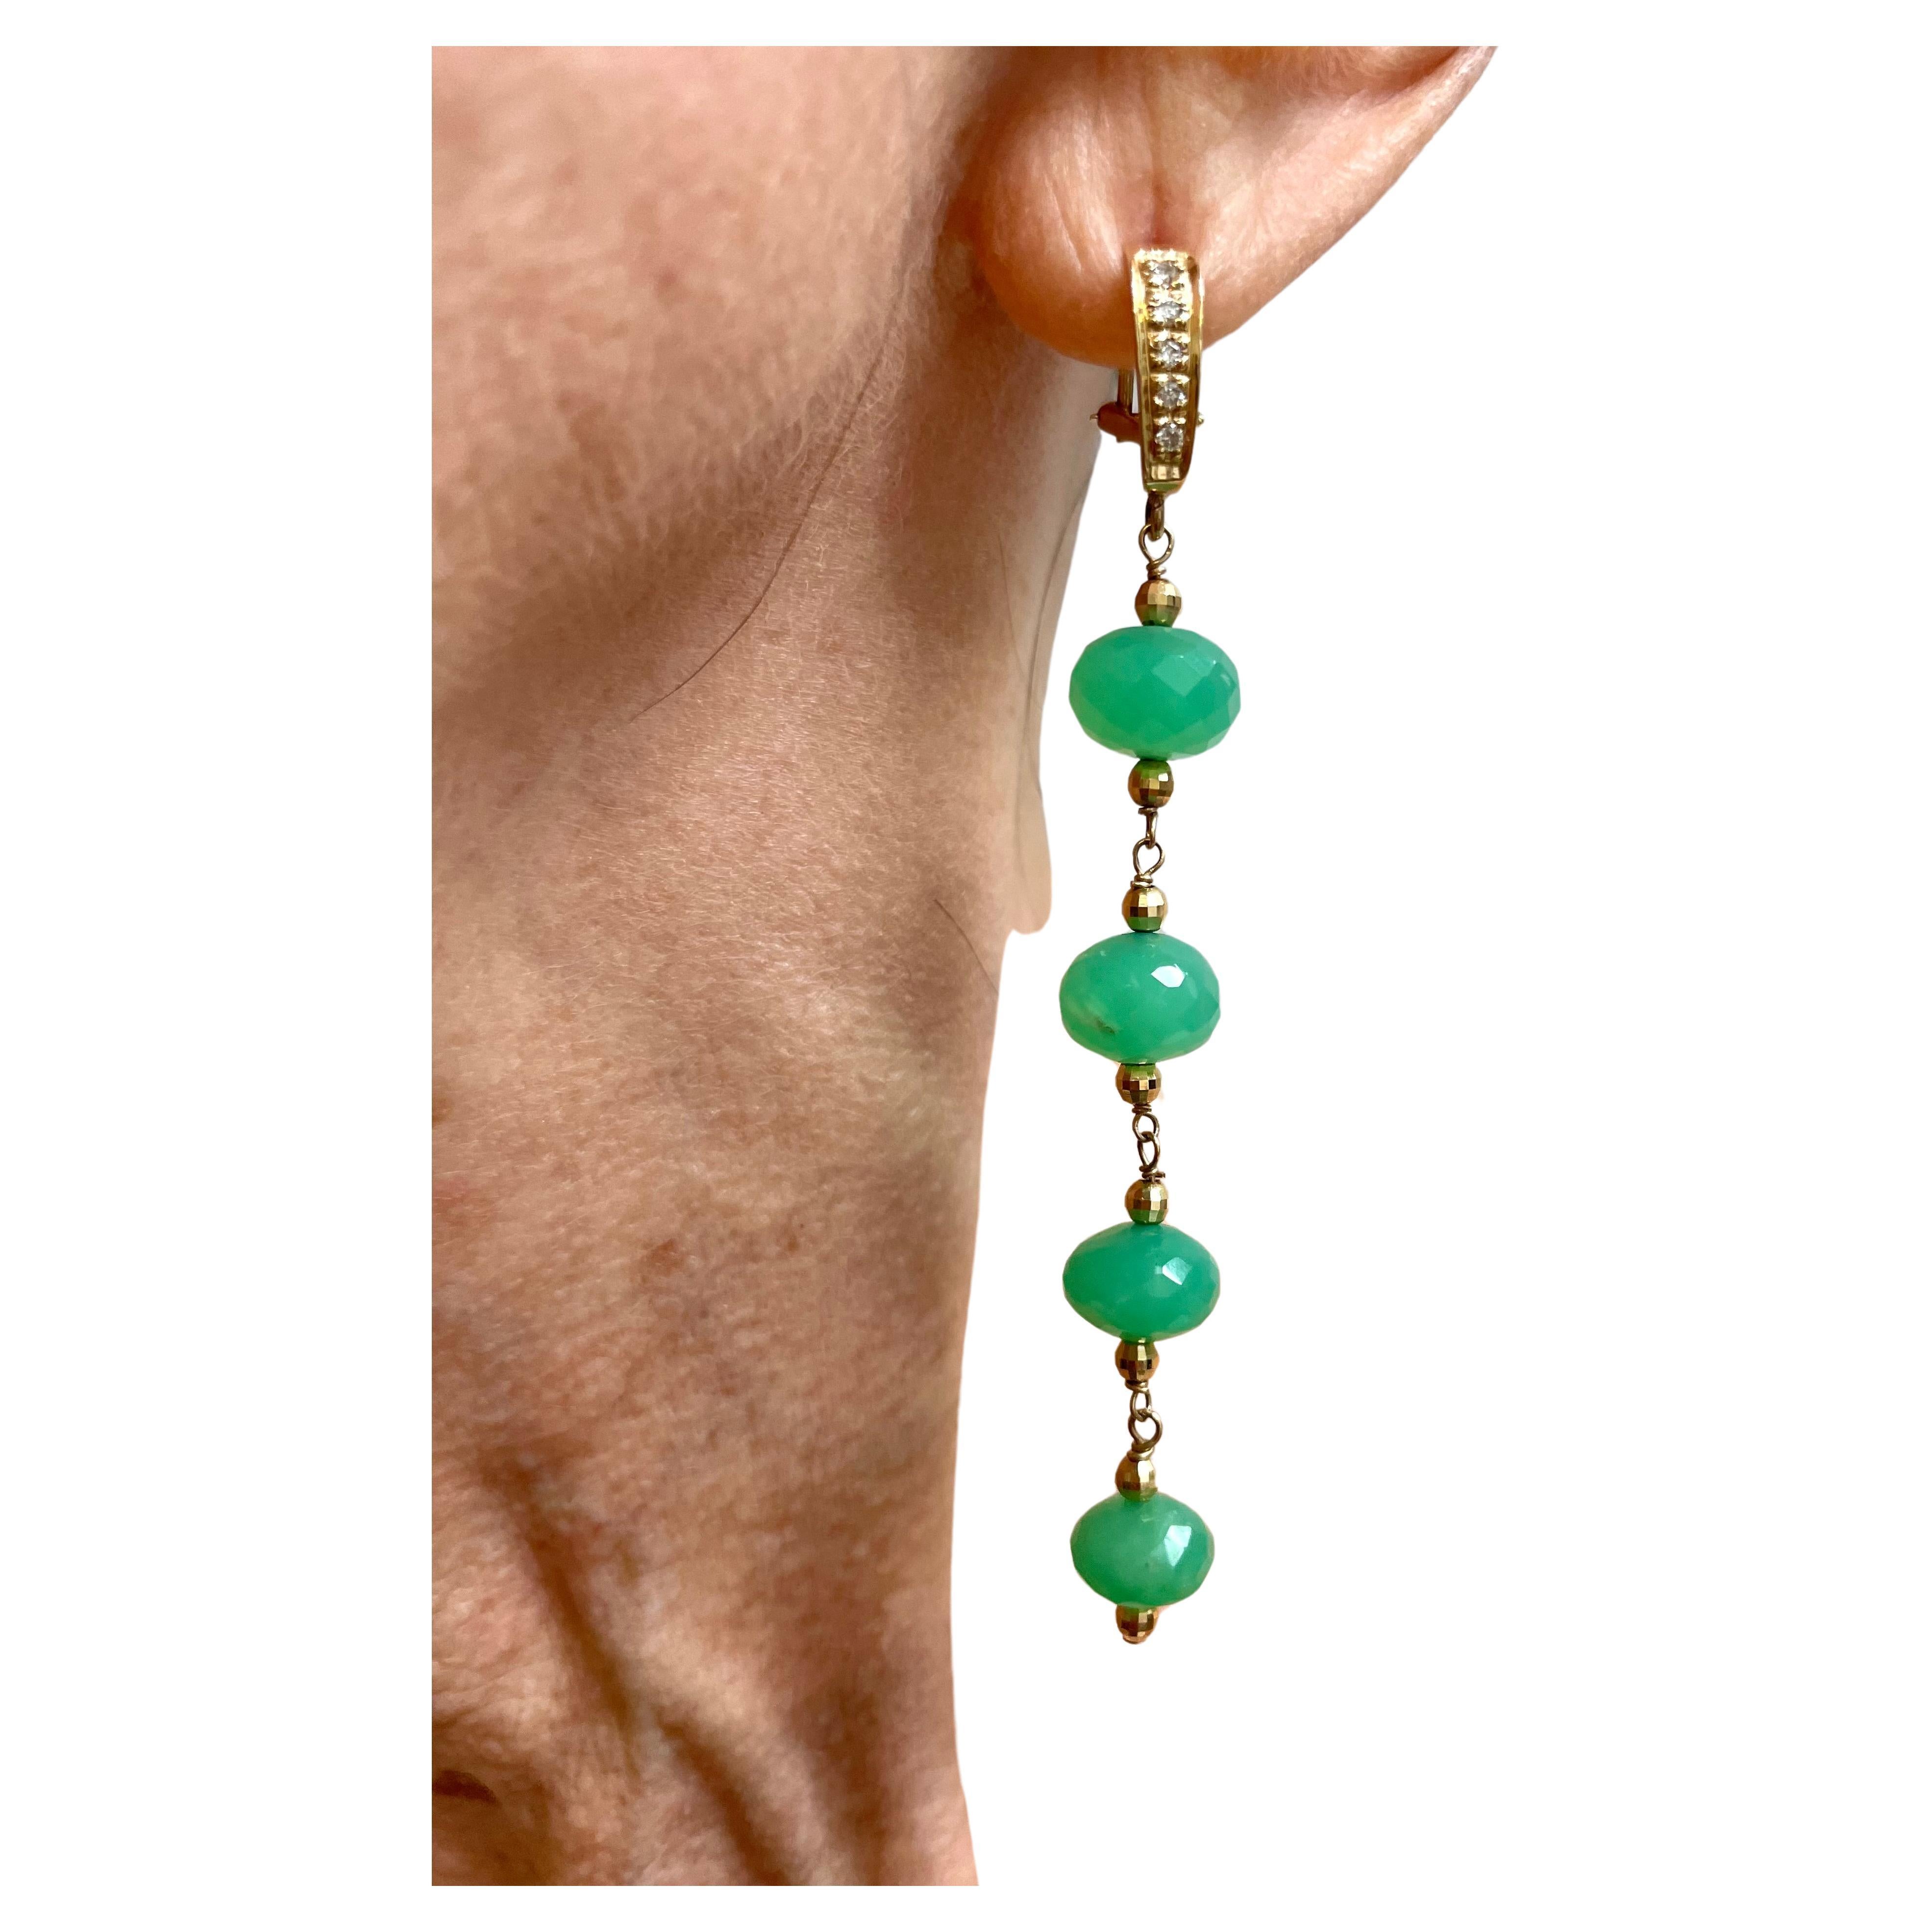 Description
The depth and richness of this exceptional quality Chrysoprase and its mesmerizing sparkle is a perfect reflection of your powerful inner beauty and style. Designed to gracefully dance with your every move and to elegantly capture the